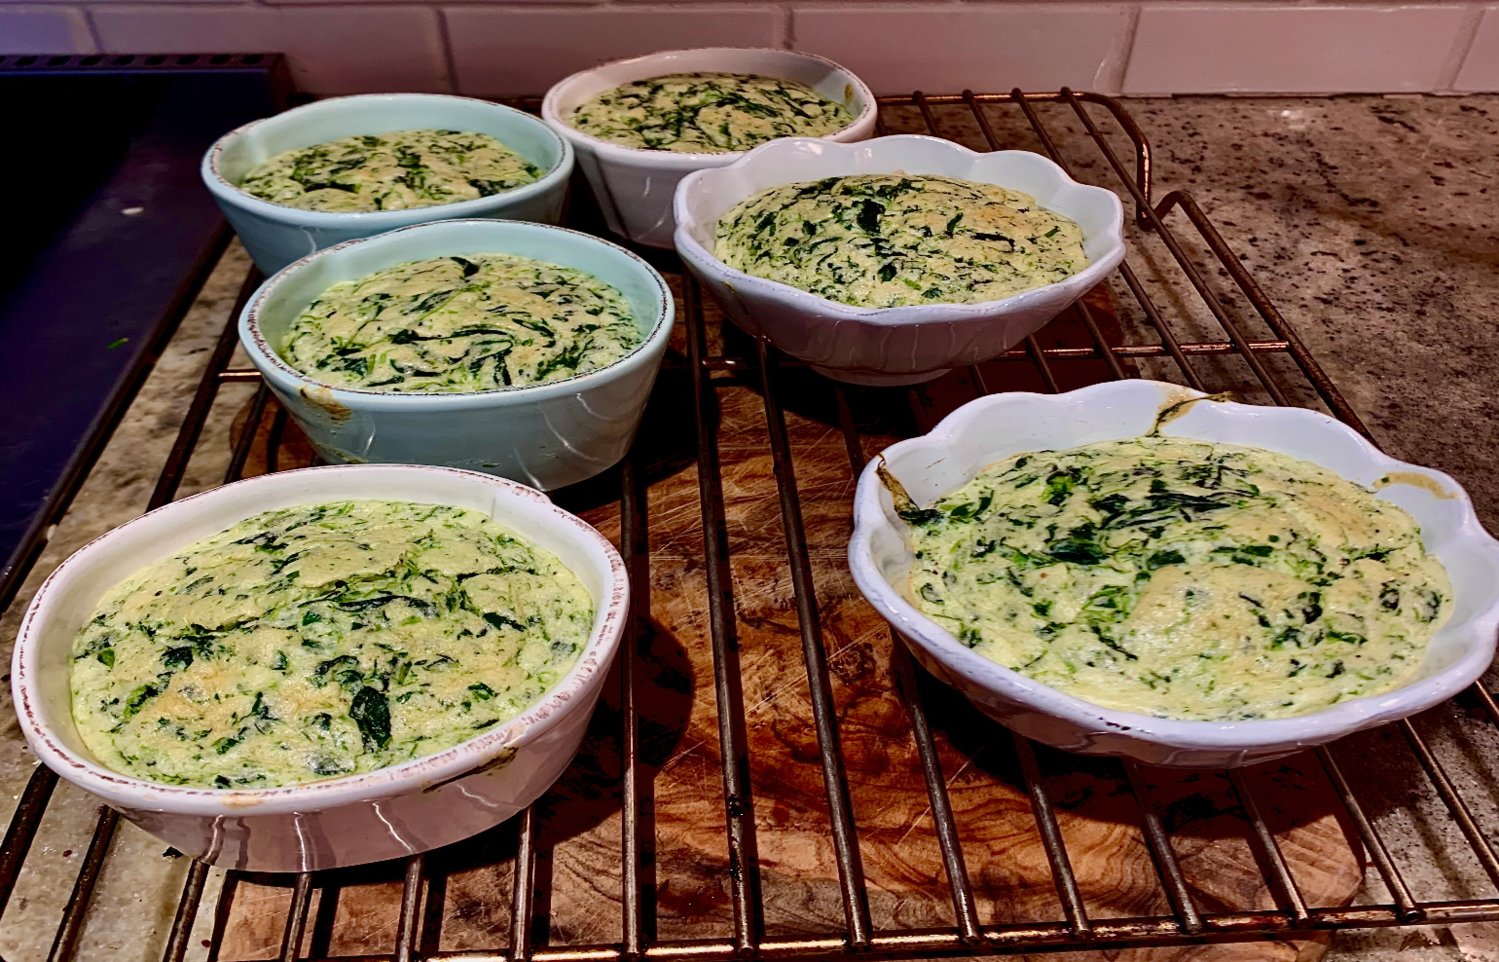 Make-ahead spinach and cheese soufflés can be completed in advance of your guests’ arrival, and accommodate many food restrictions. They’re pretty tasty, too.